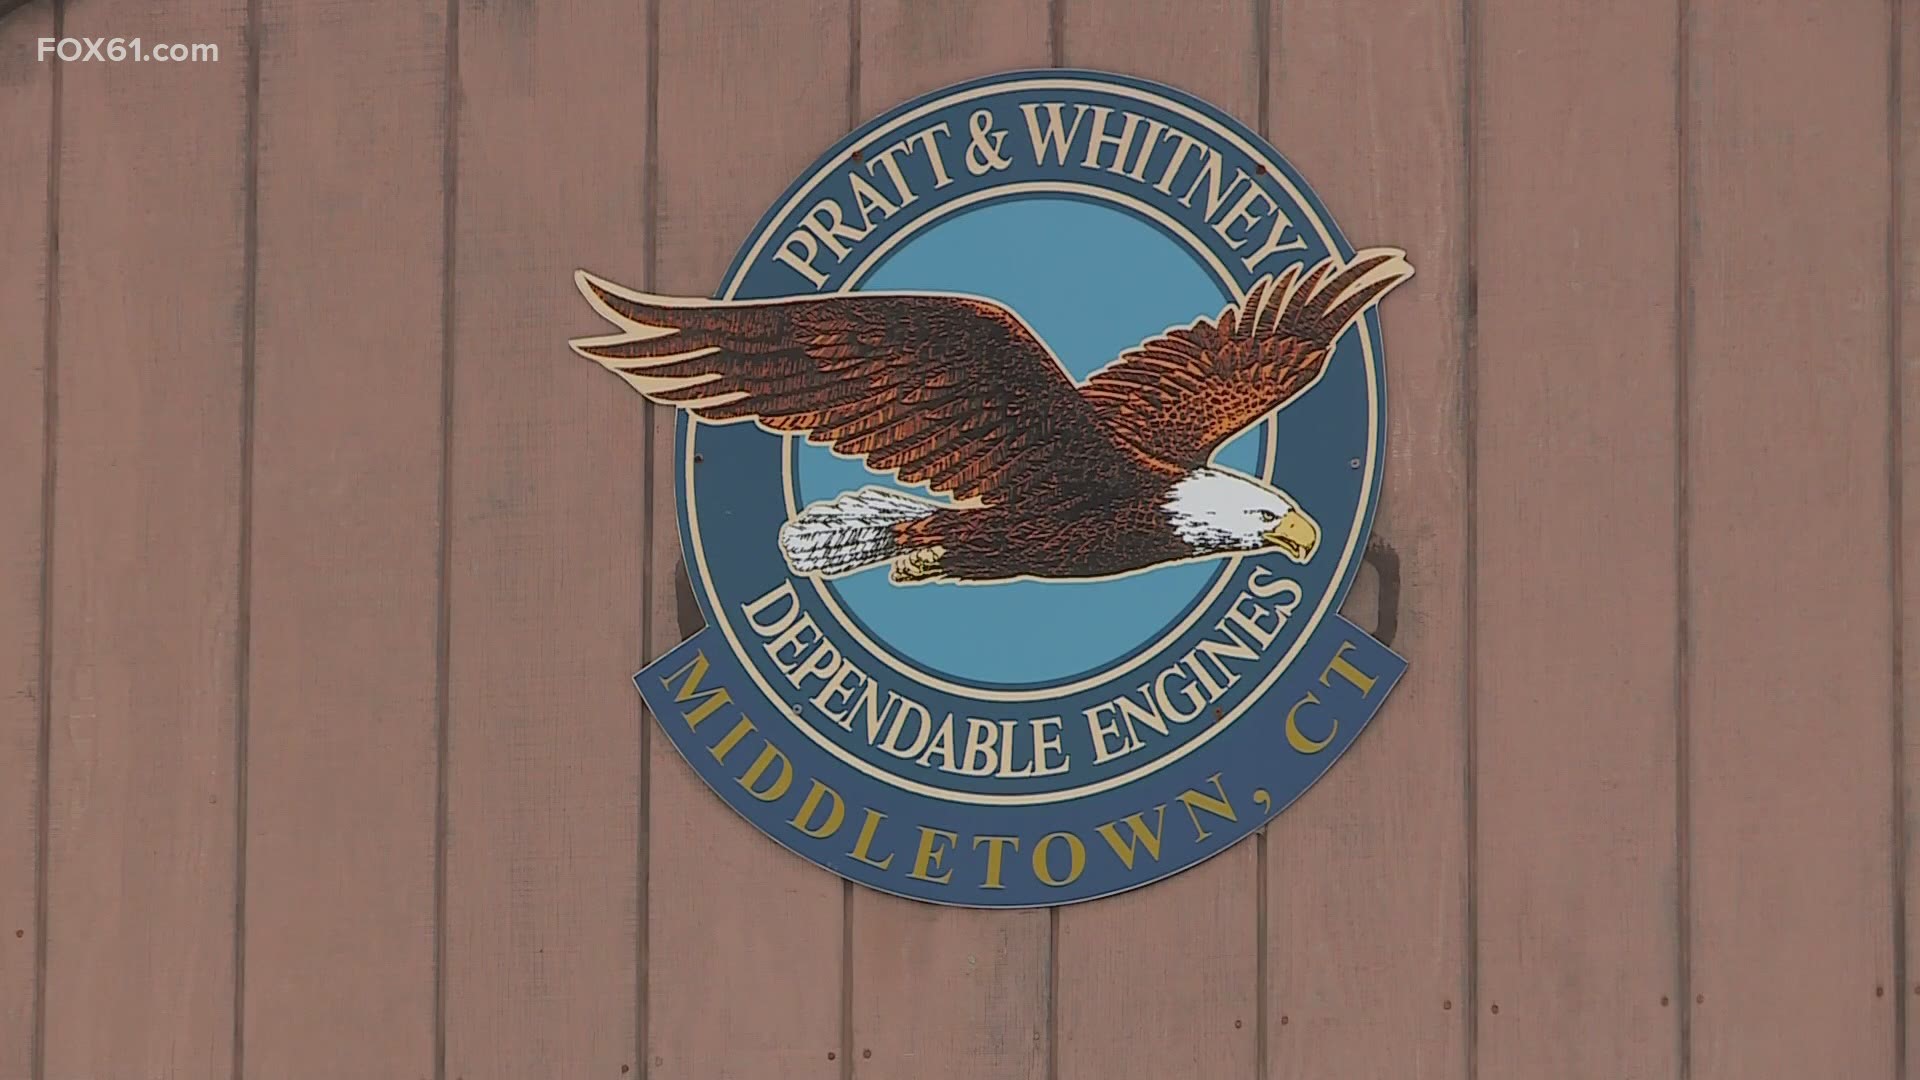 Pratt & Whitney purchased gift cards for its employees in East Hartford and Middletown.